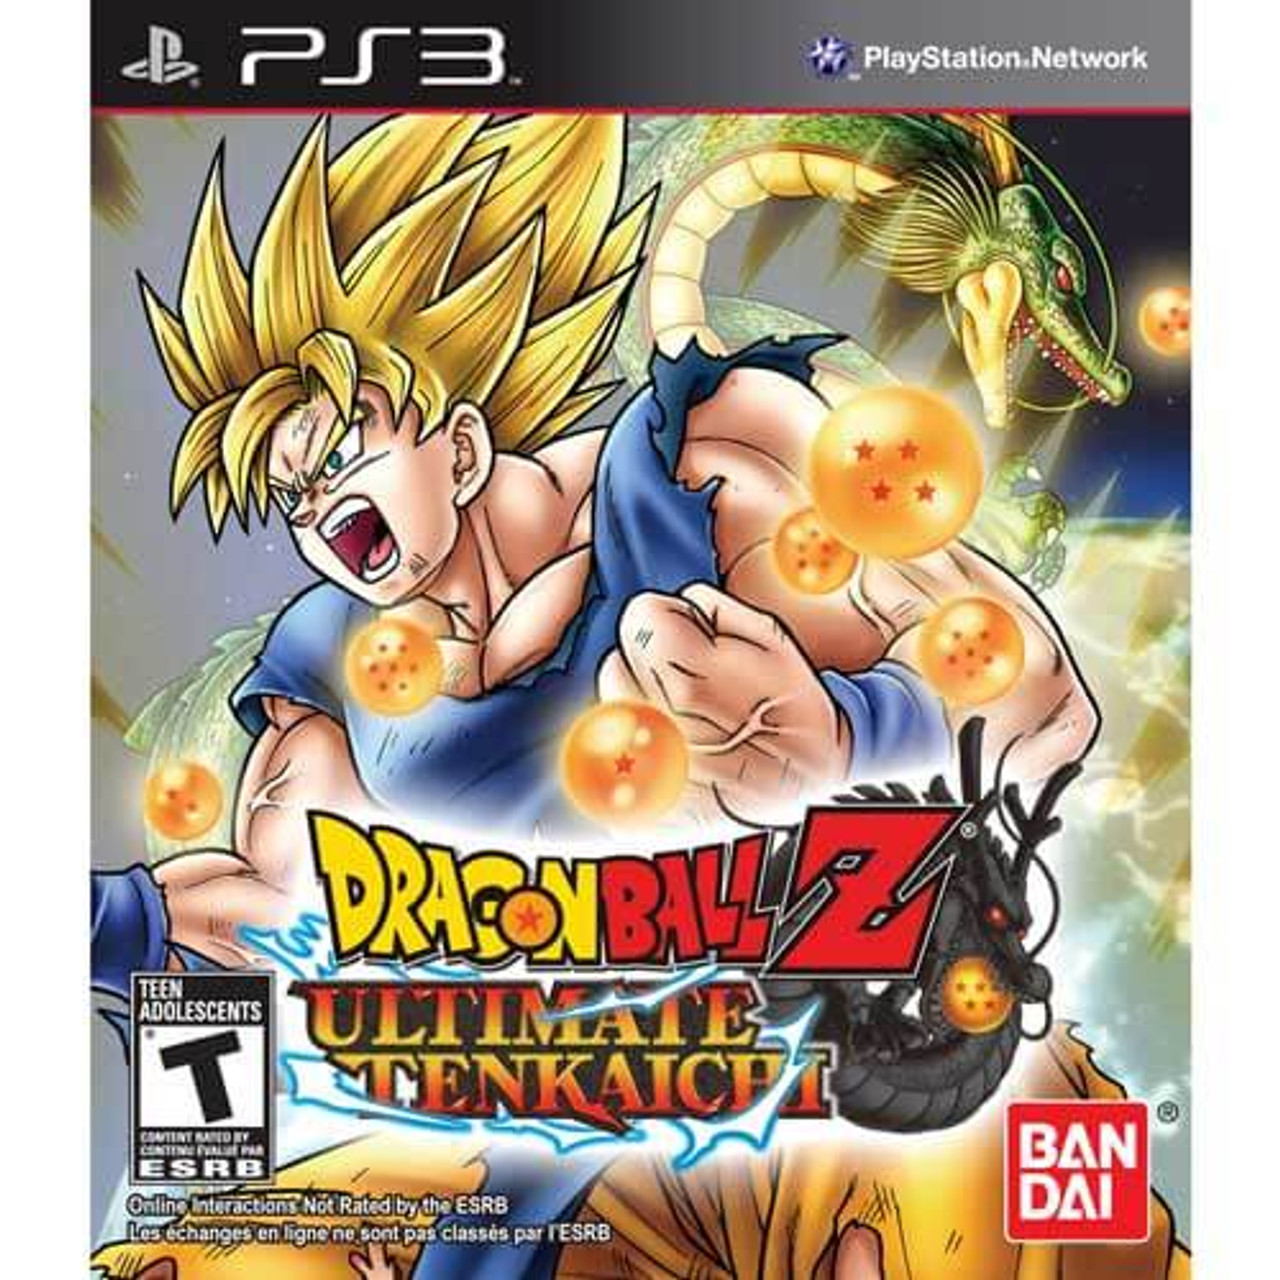 Dragon Ball Z Ultimate Tenkaichi PS3 Game For Sale DKOldies